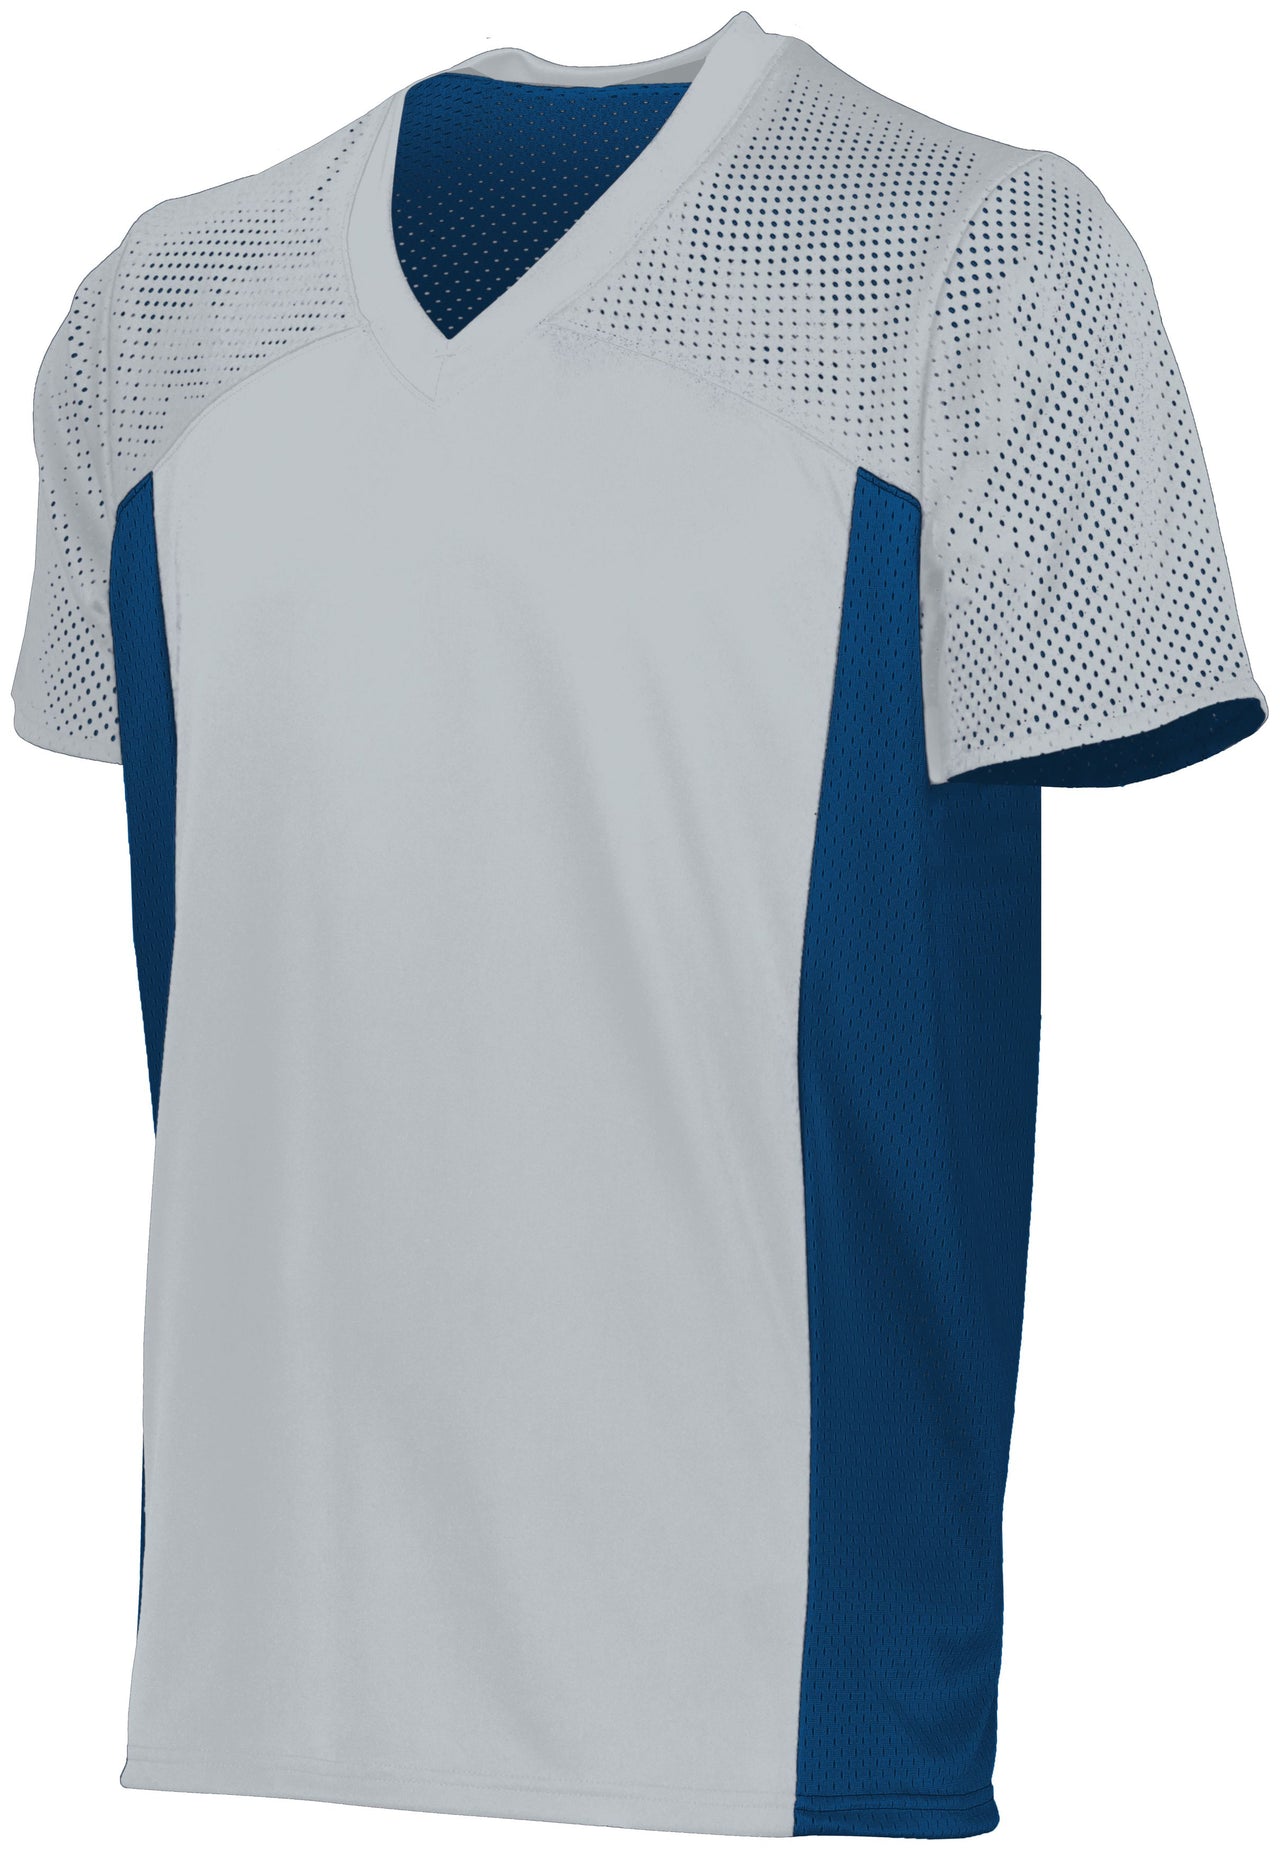 Youth Reversible Flag Football Jersey - 265